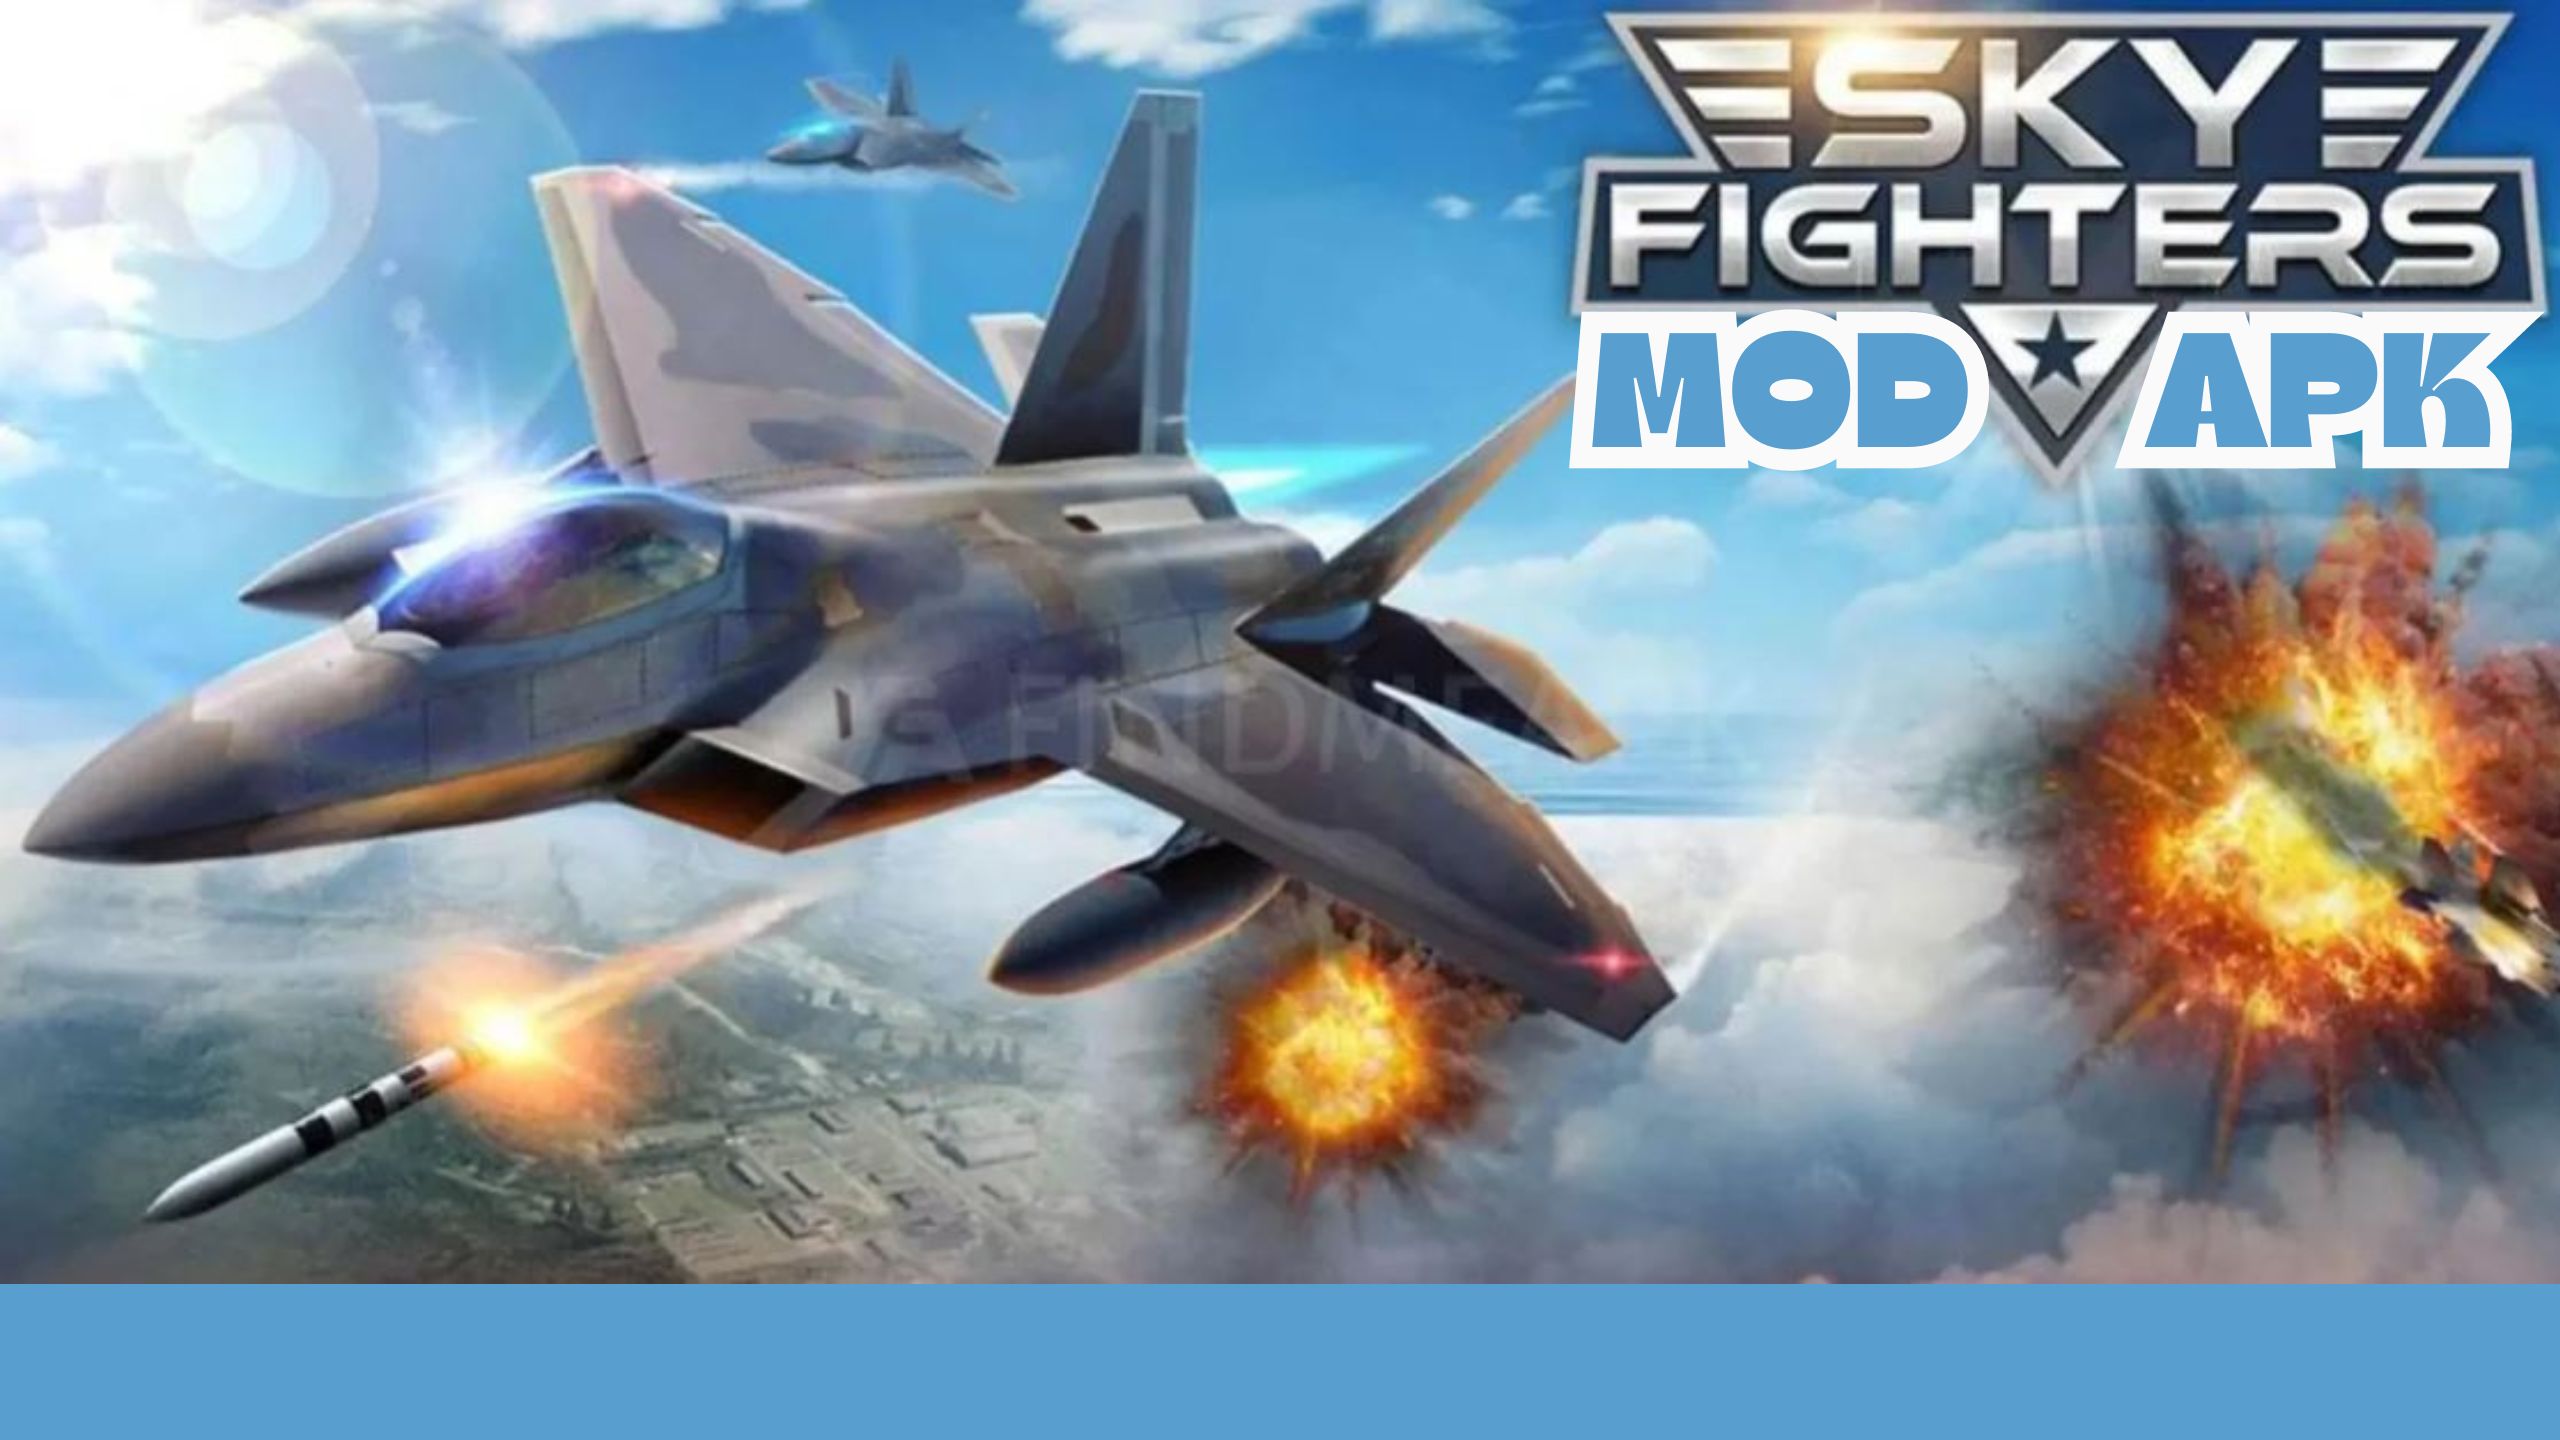 latest version of sky fighter 3d MOD APK for android